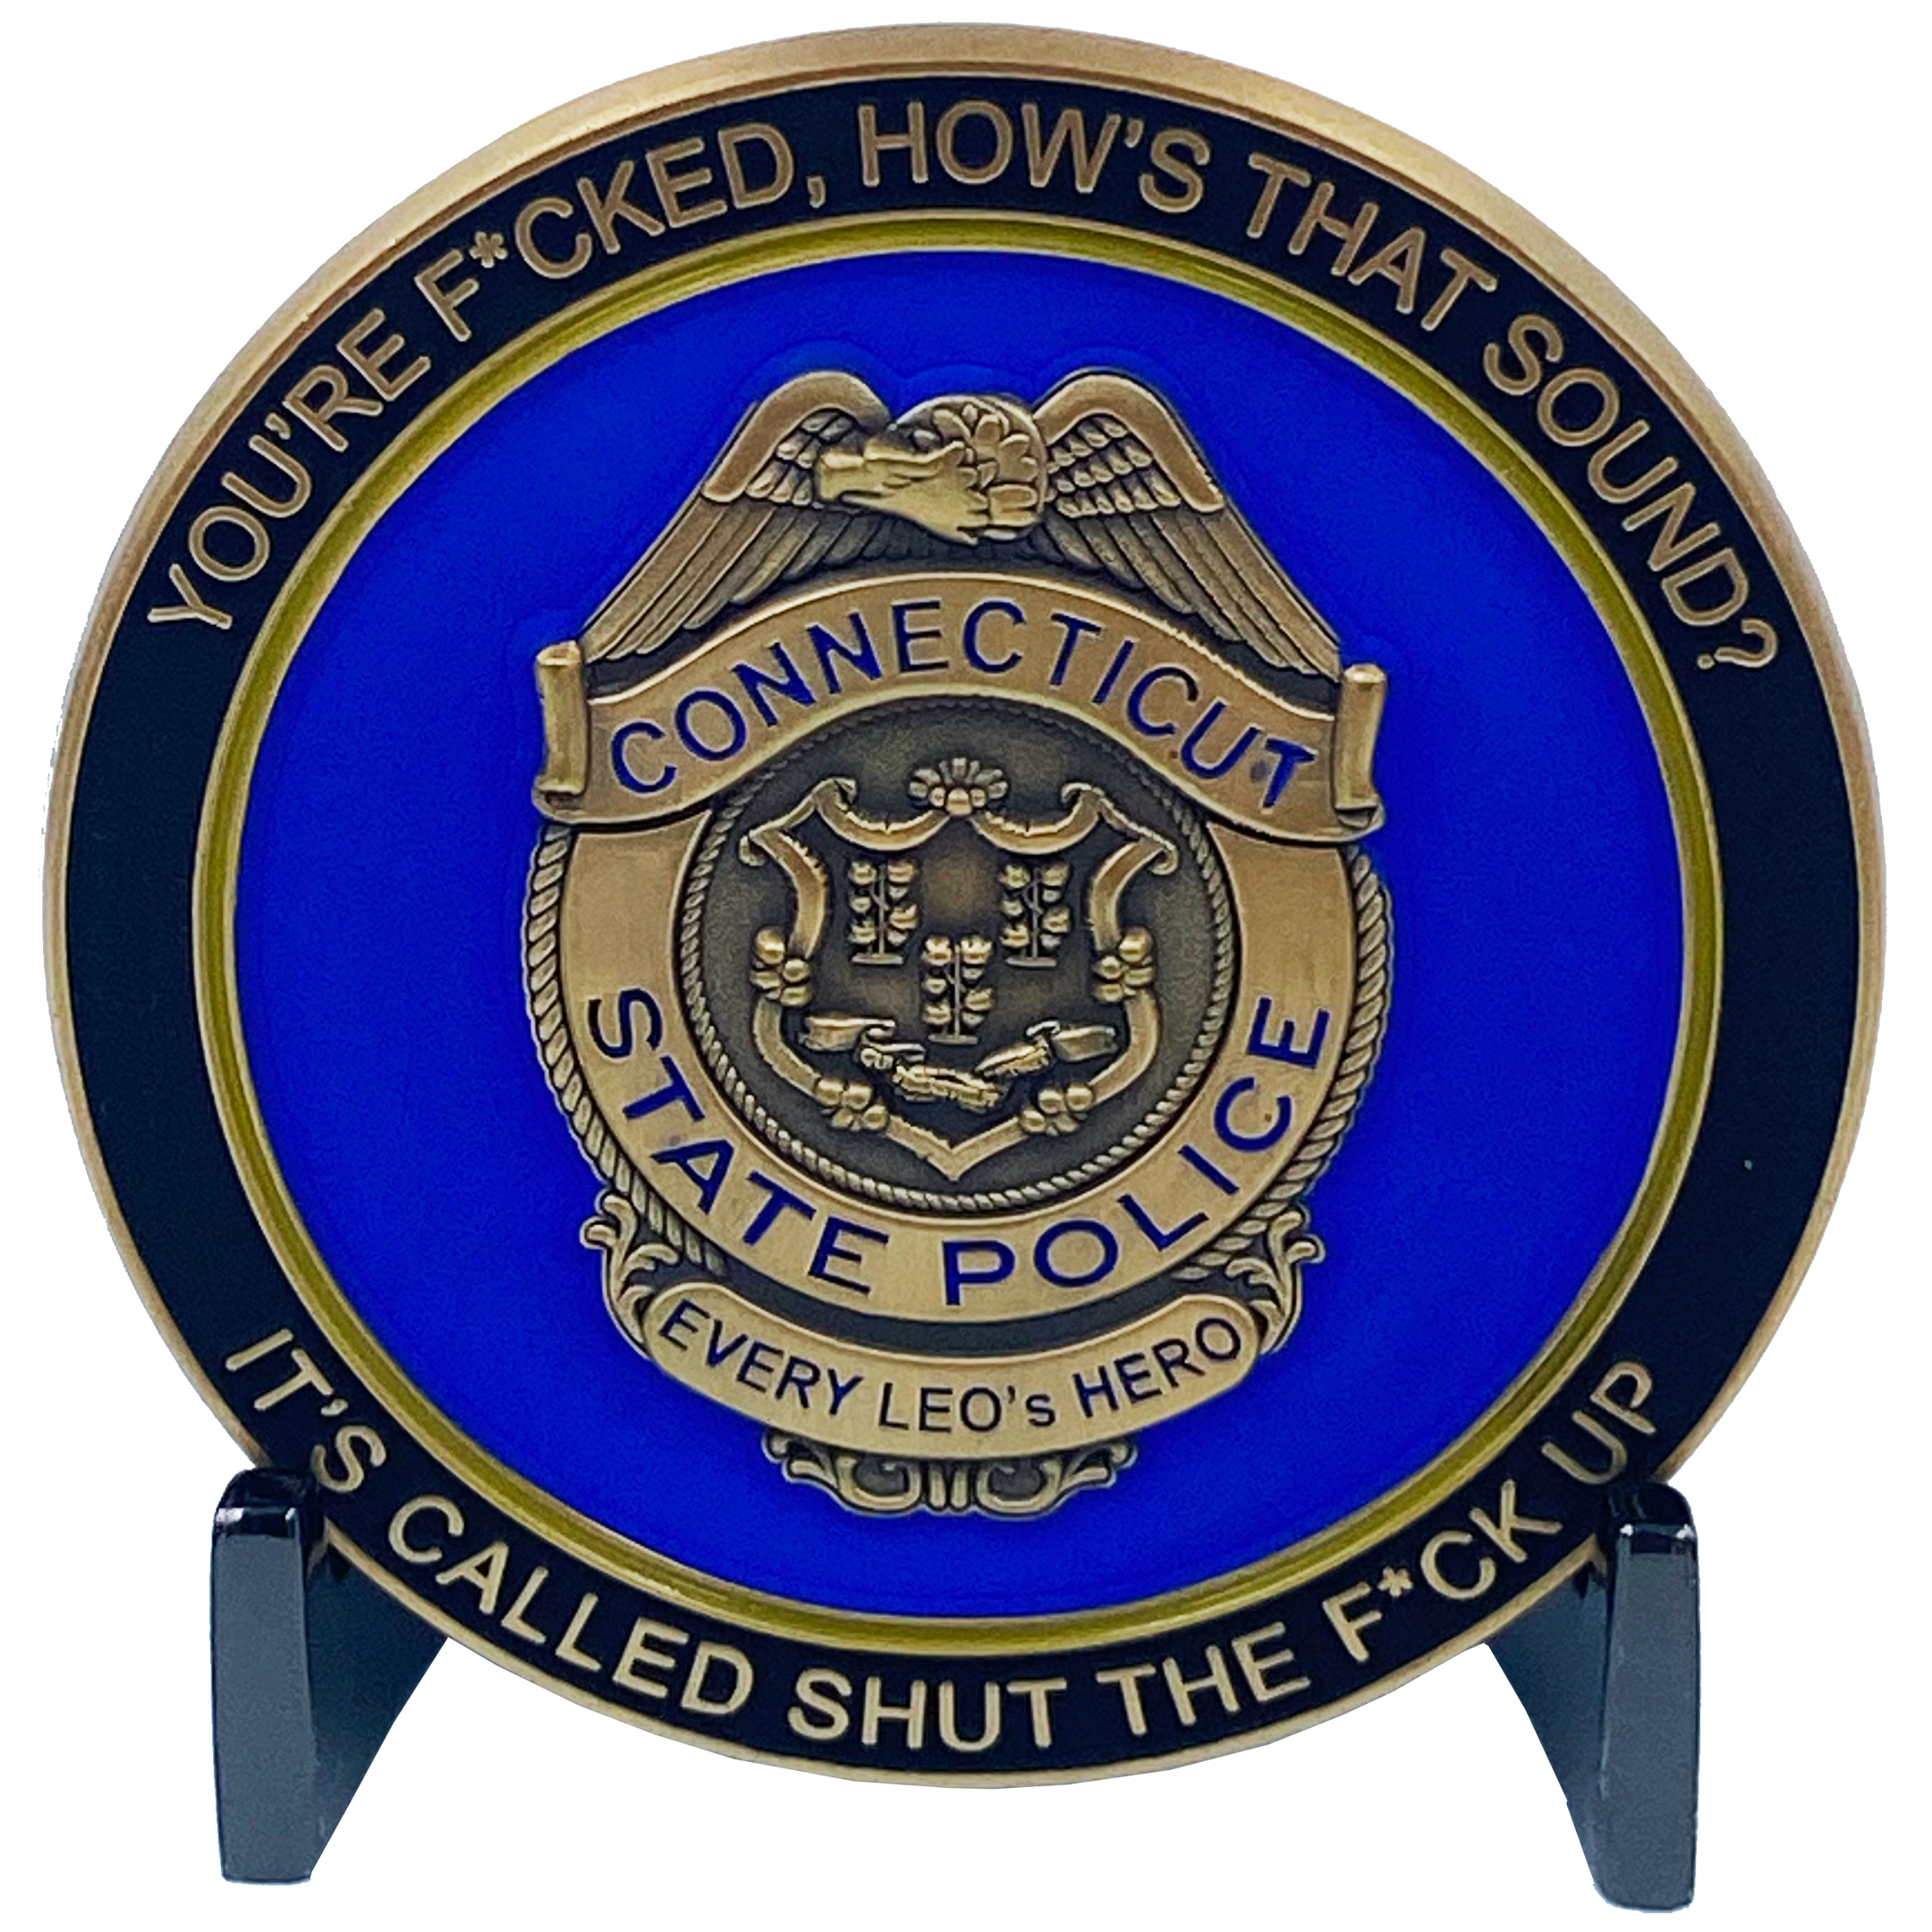 CL6-15 CSP Version 1 Challenge Coin inspired by Connecticut State Police CT Trooper Matthew Spina